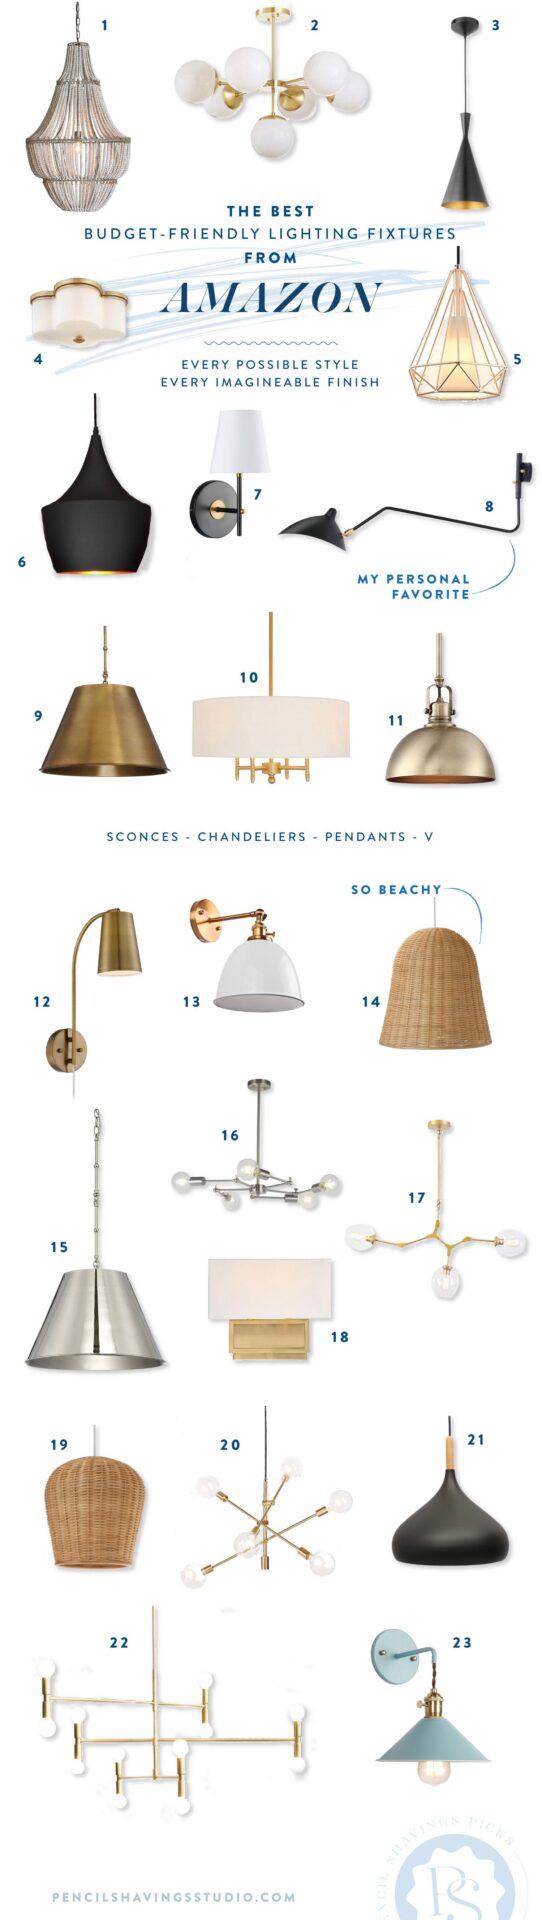 23 budget friendly lighting fixtures from Amazon, in a variety of styles and finishes. #amazonprime #amazon #lighting #budgetlighting #hardwiredlighting #chandeliers #pendants #wallmount #flushmount www.pencilshavingsstudio.com